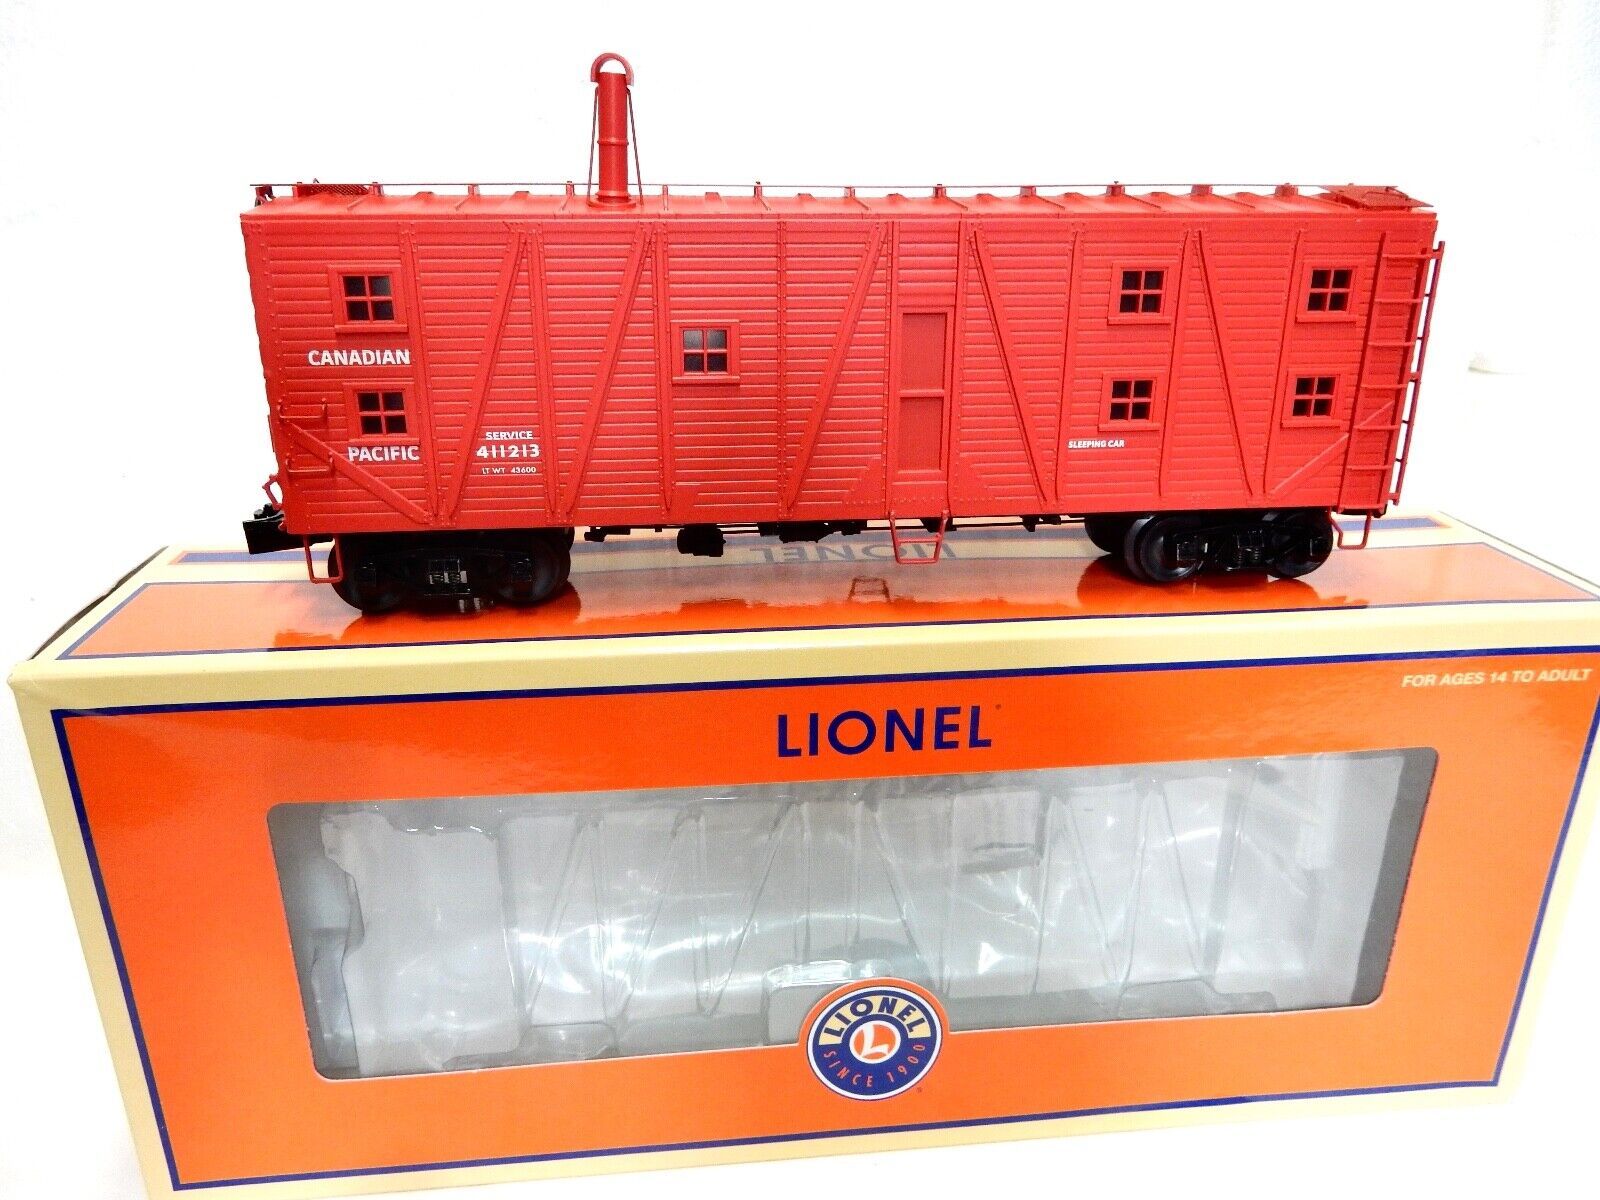 Lionel #2126621 Canadian Pacific Sleeping-Bunk Car w LED Lighting -O Scale -New